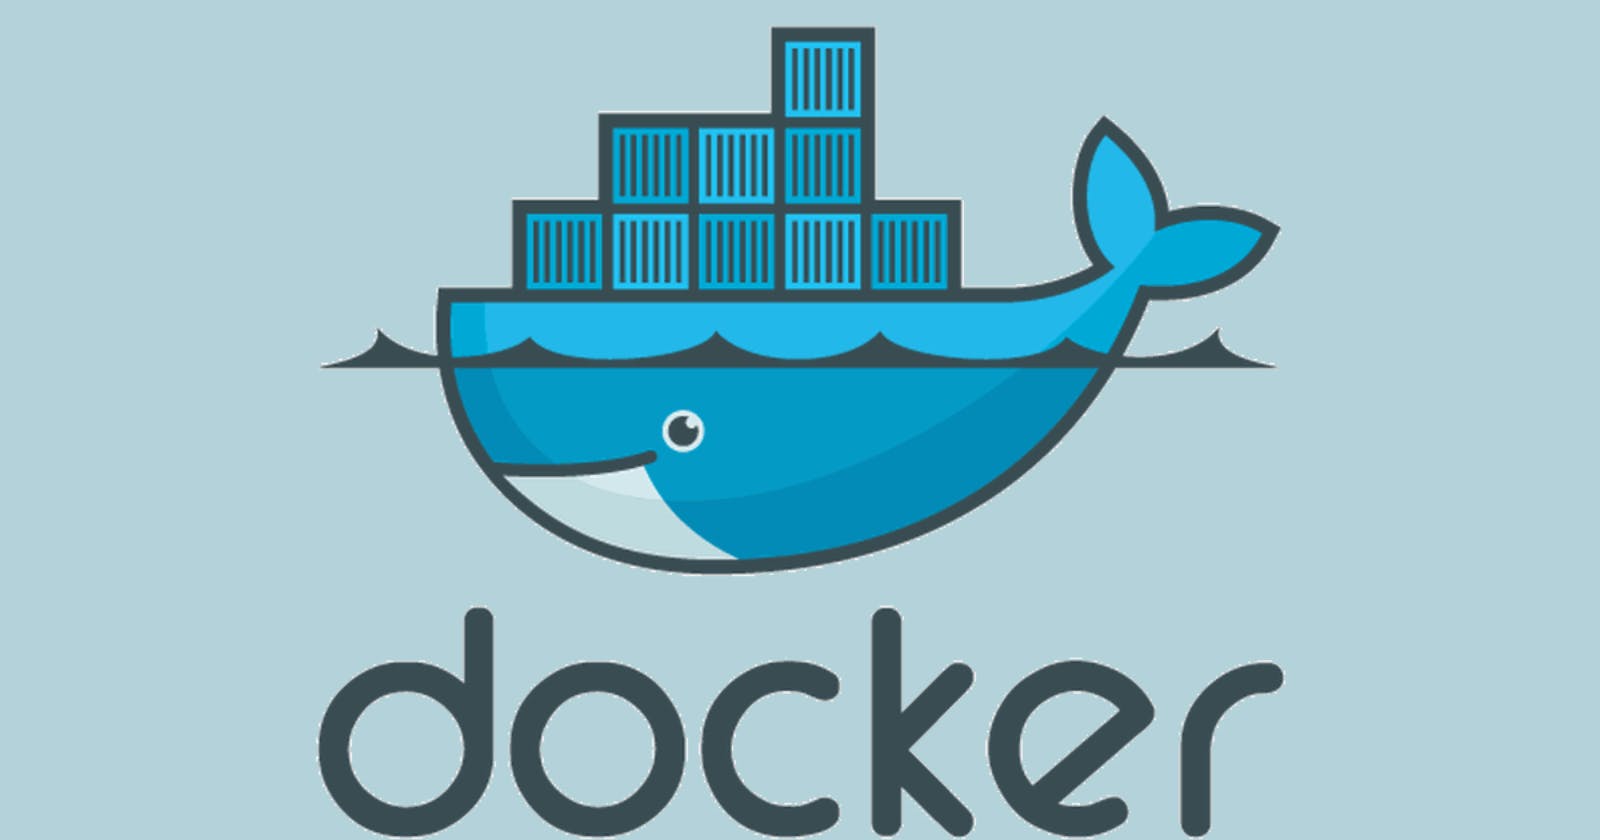 Failed to start the docker engine error: Solutions and Suggestions